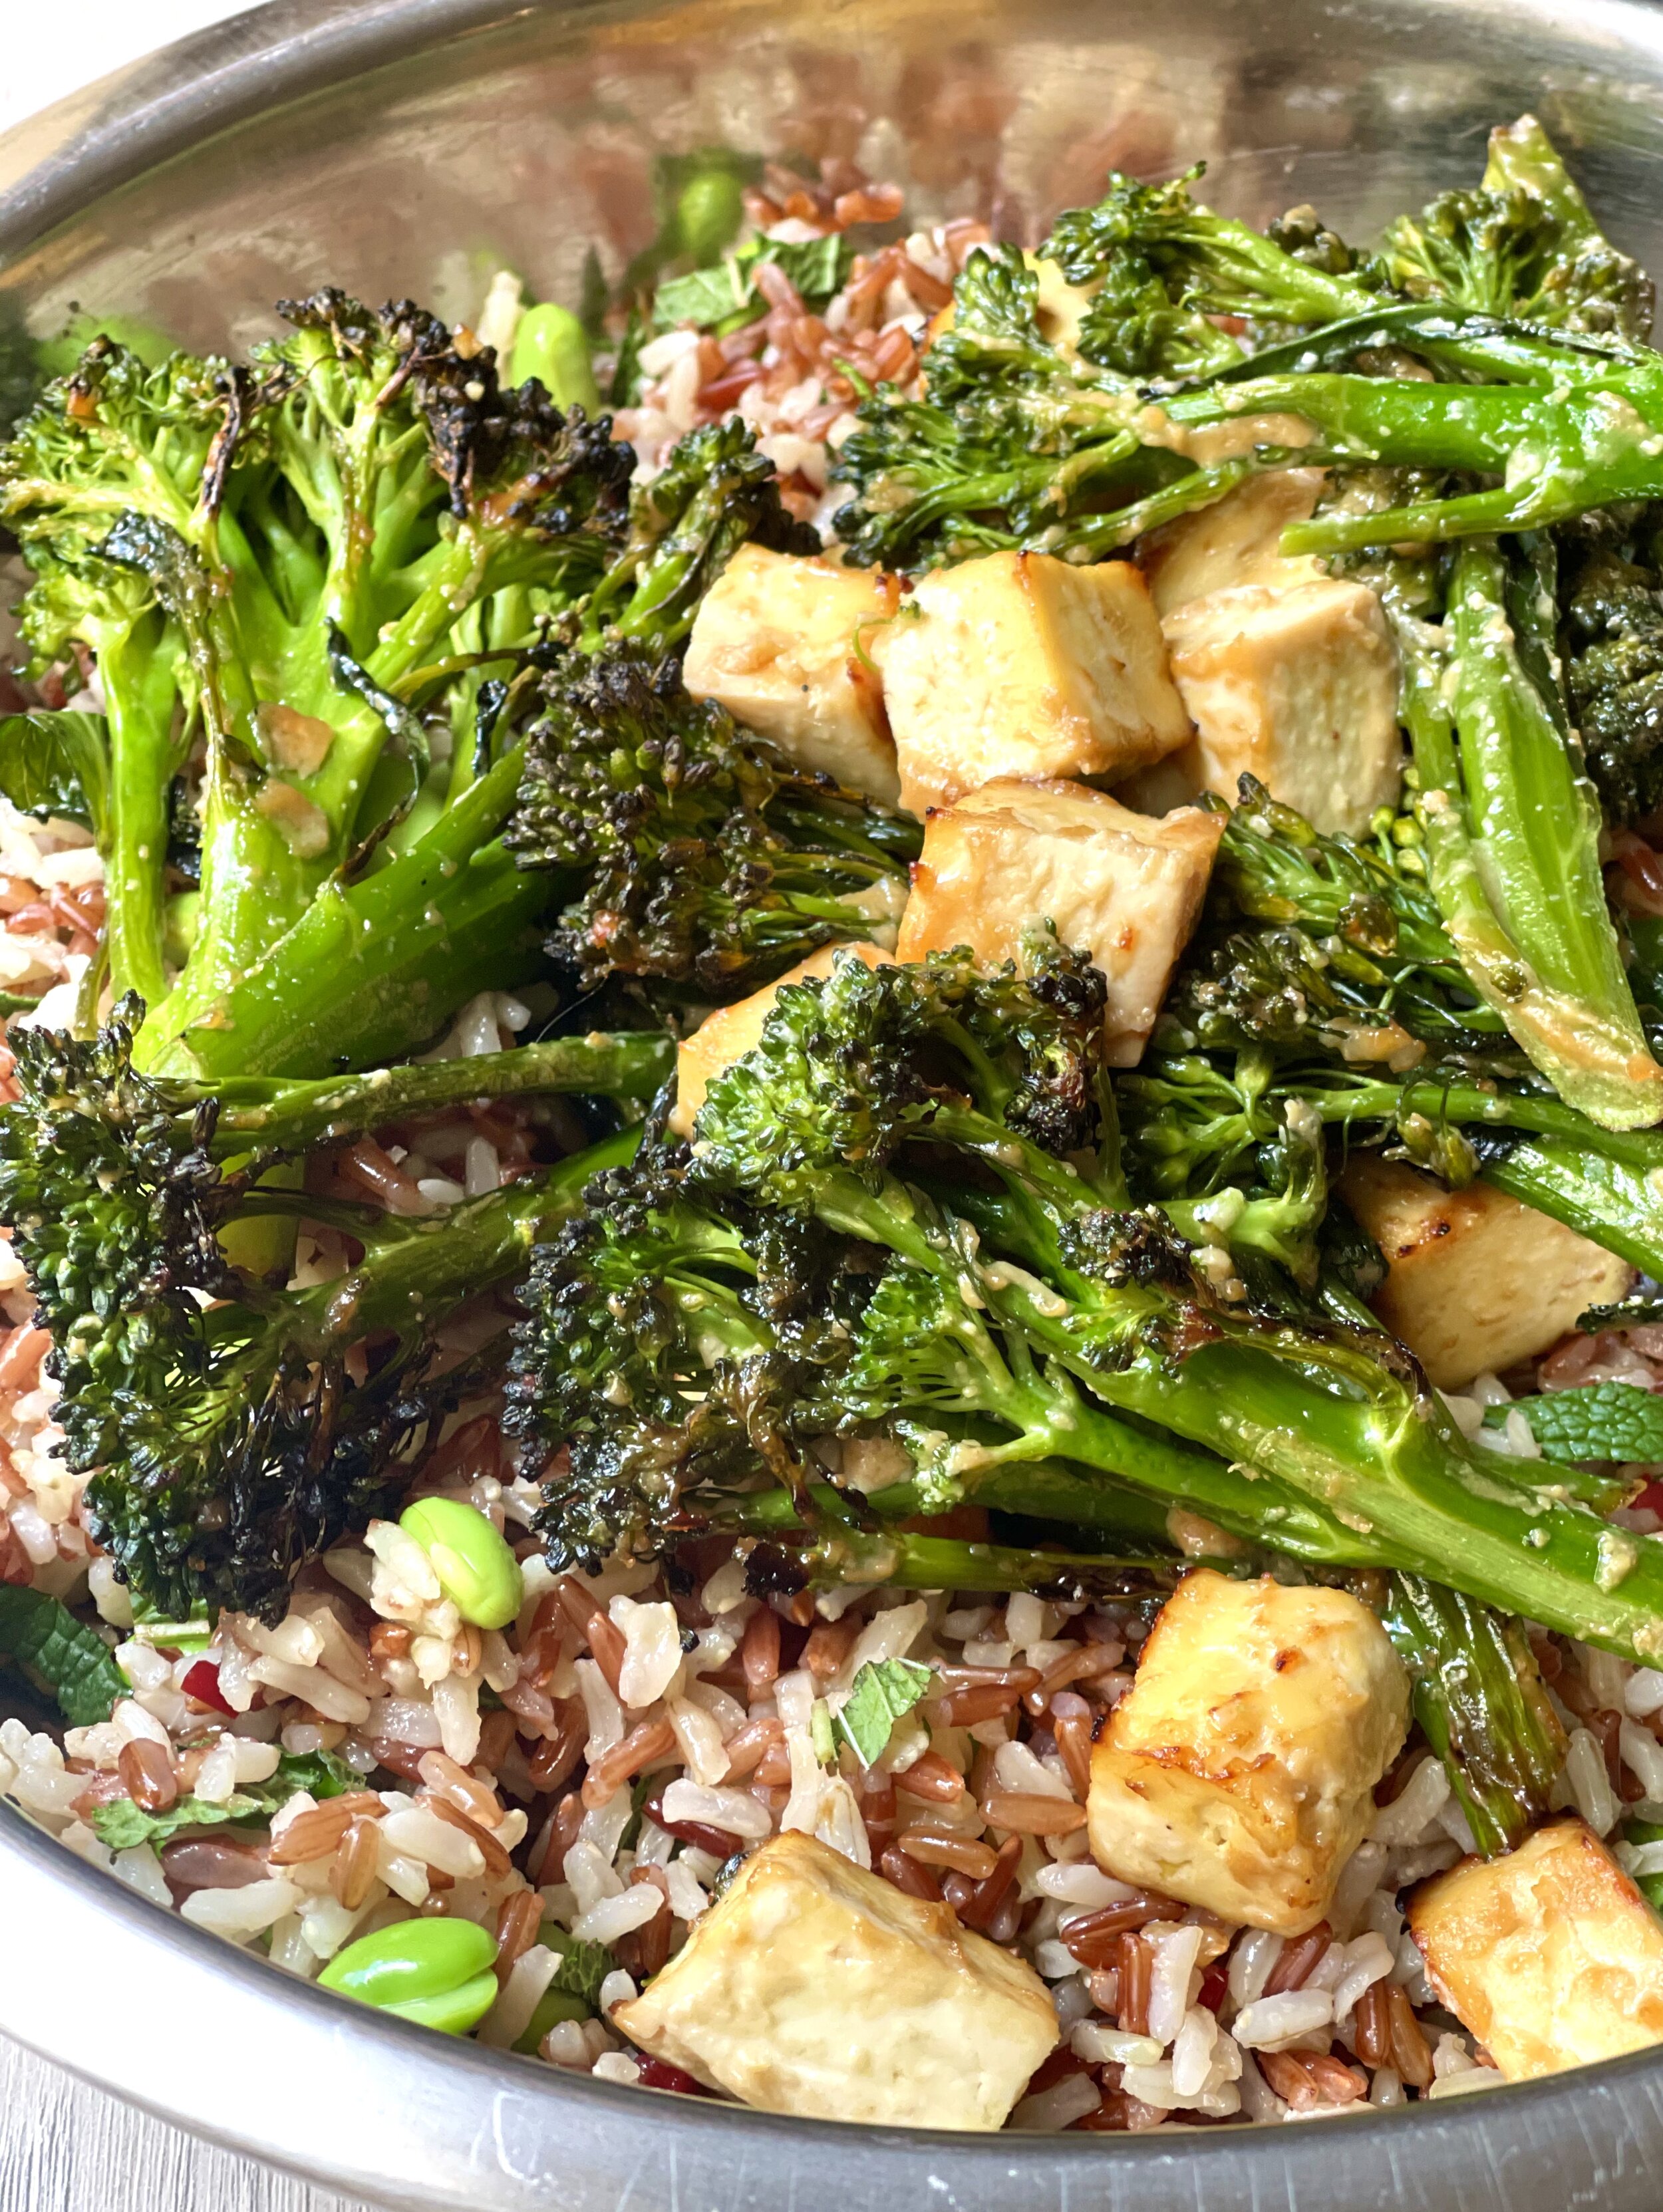 Mixing a miso roasted tofu and wild rice salad